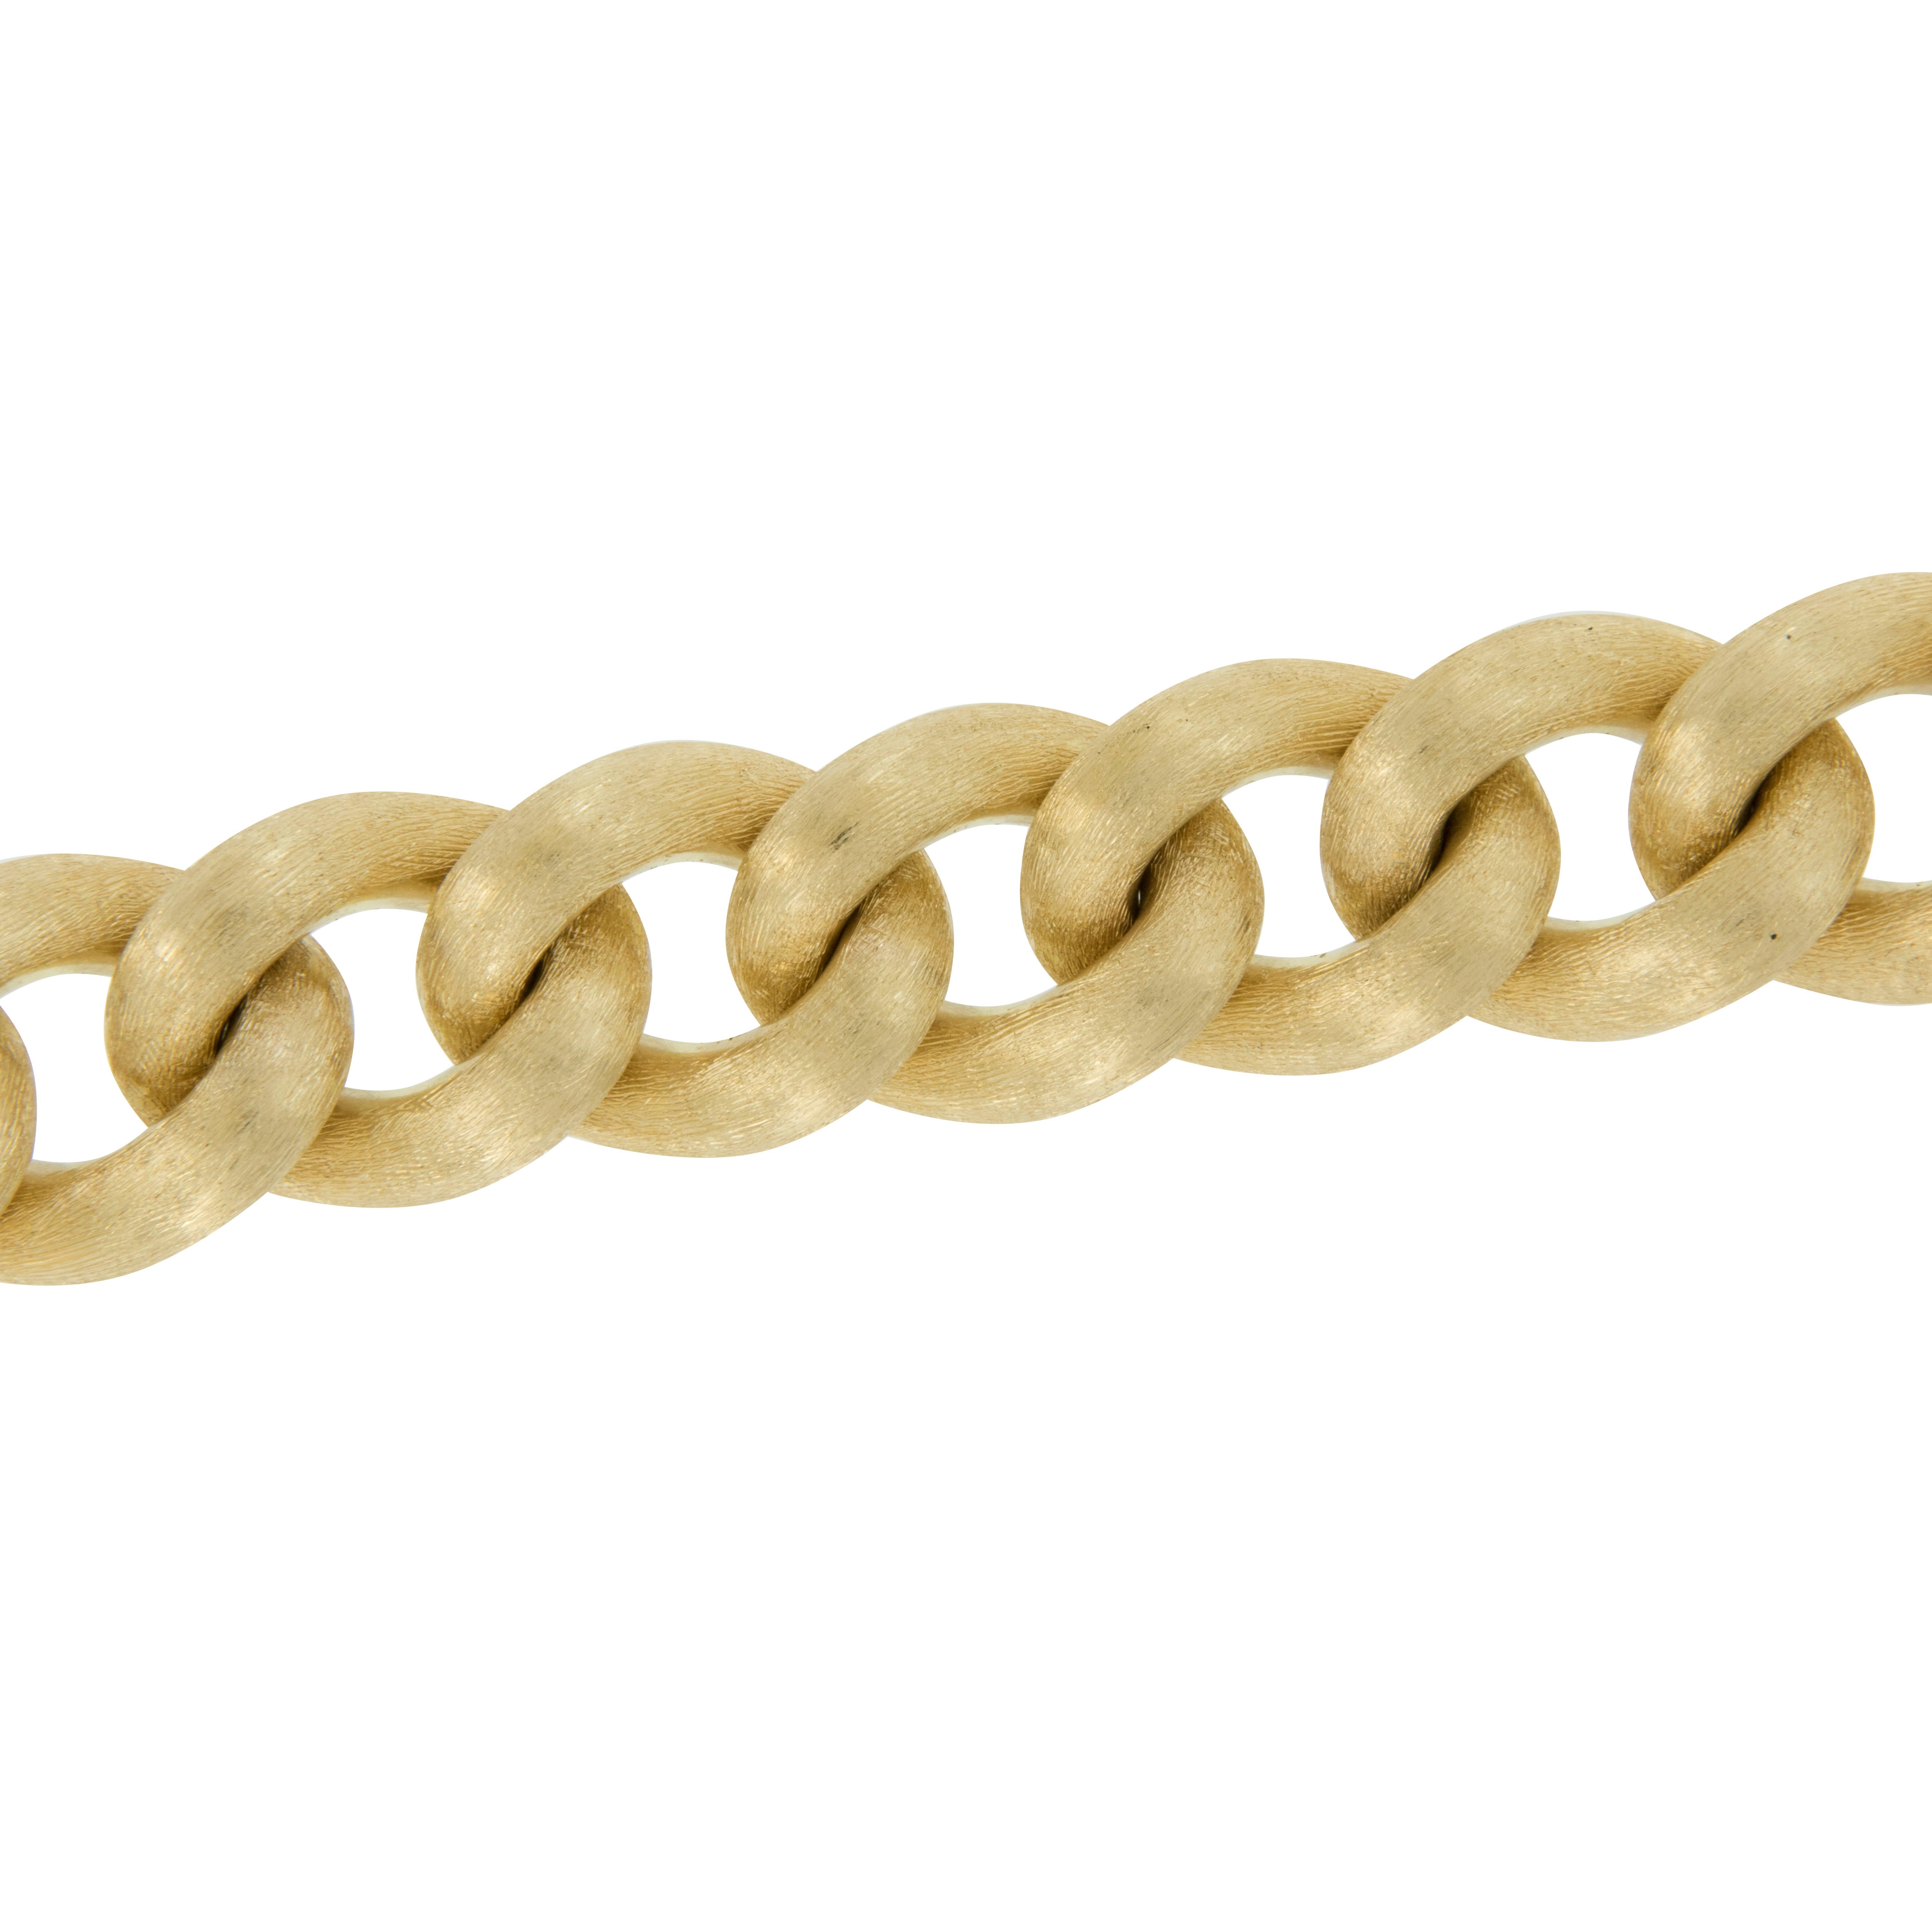 Made in Italy by expert craftsmen, this 18 karat yellow gold curb bracelet with Florentine finish is a delight for the eye! For generations, a specialist engraving technique has been passed down from one master craftsperson to the next. Its beauty